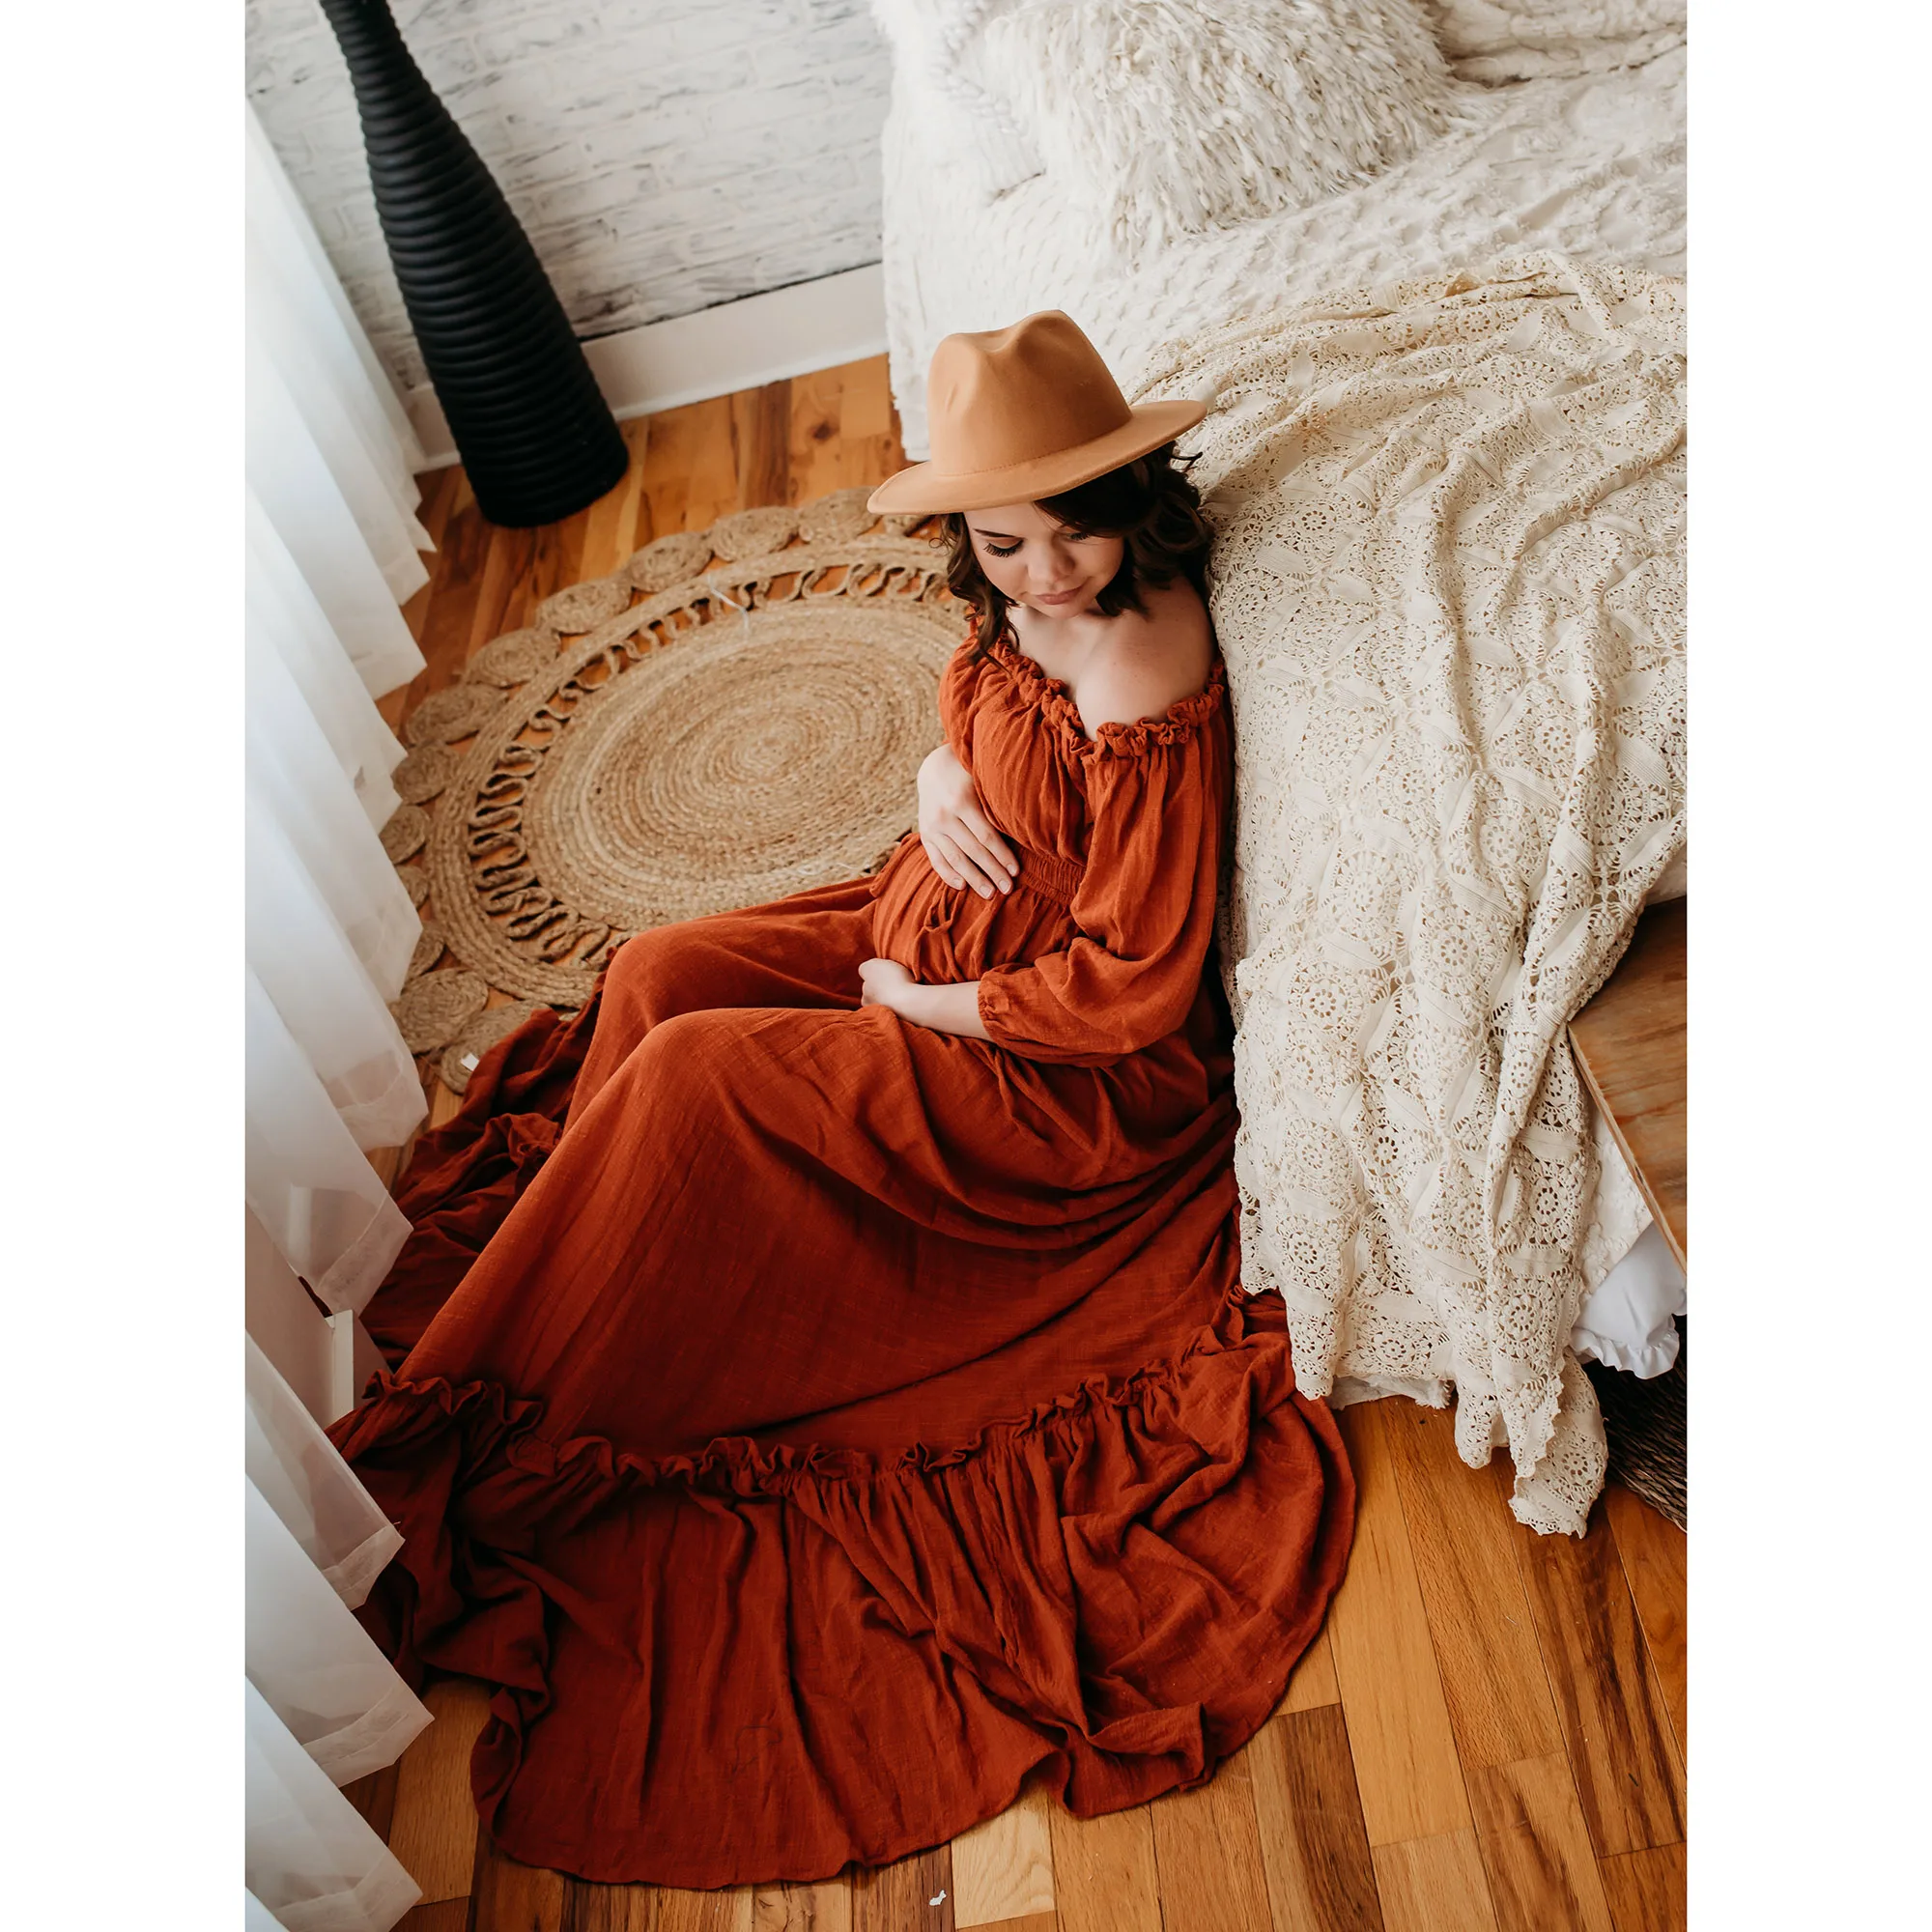 Don&Judy Boho Off Shoulder Maternity Gown Photography Evening Side Split Fashion Dress Baby Shower Robe for Pregnant Woman 2022 enlarge